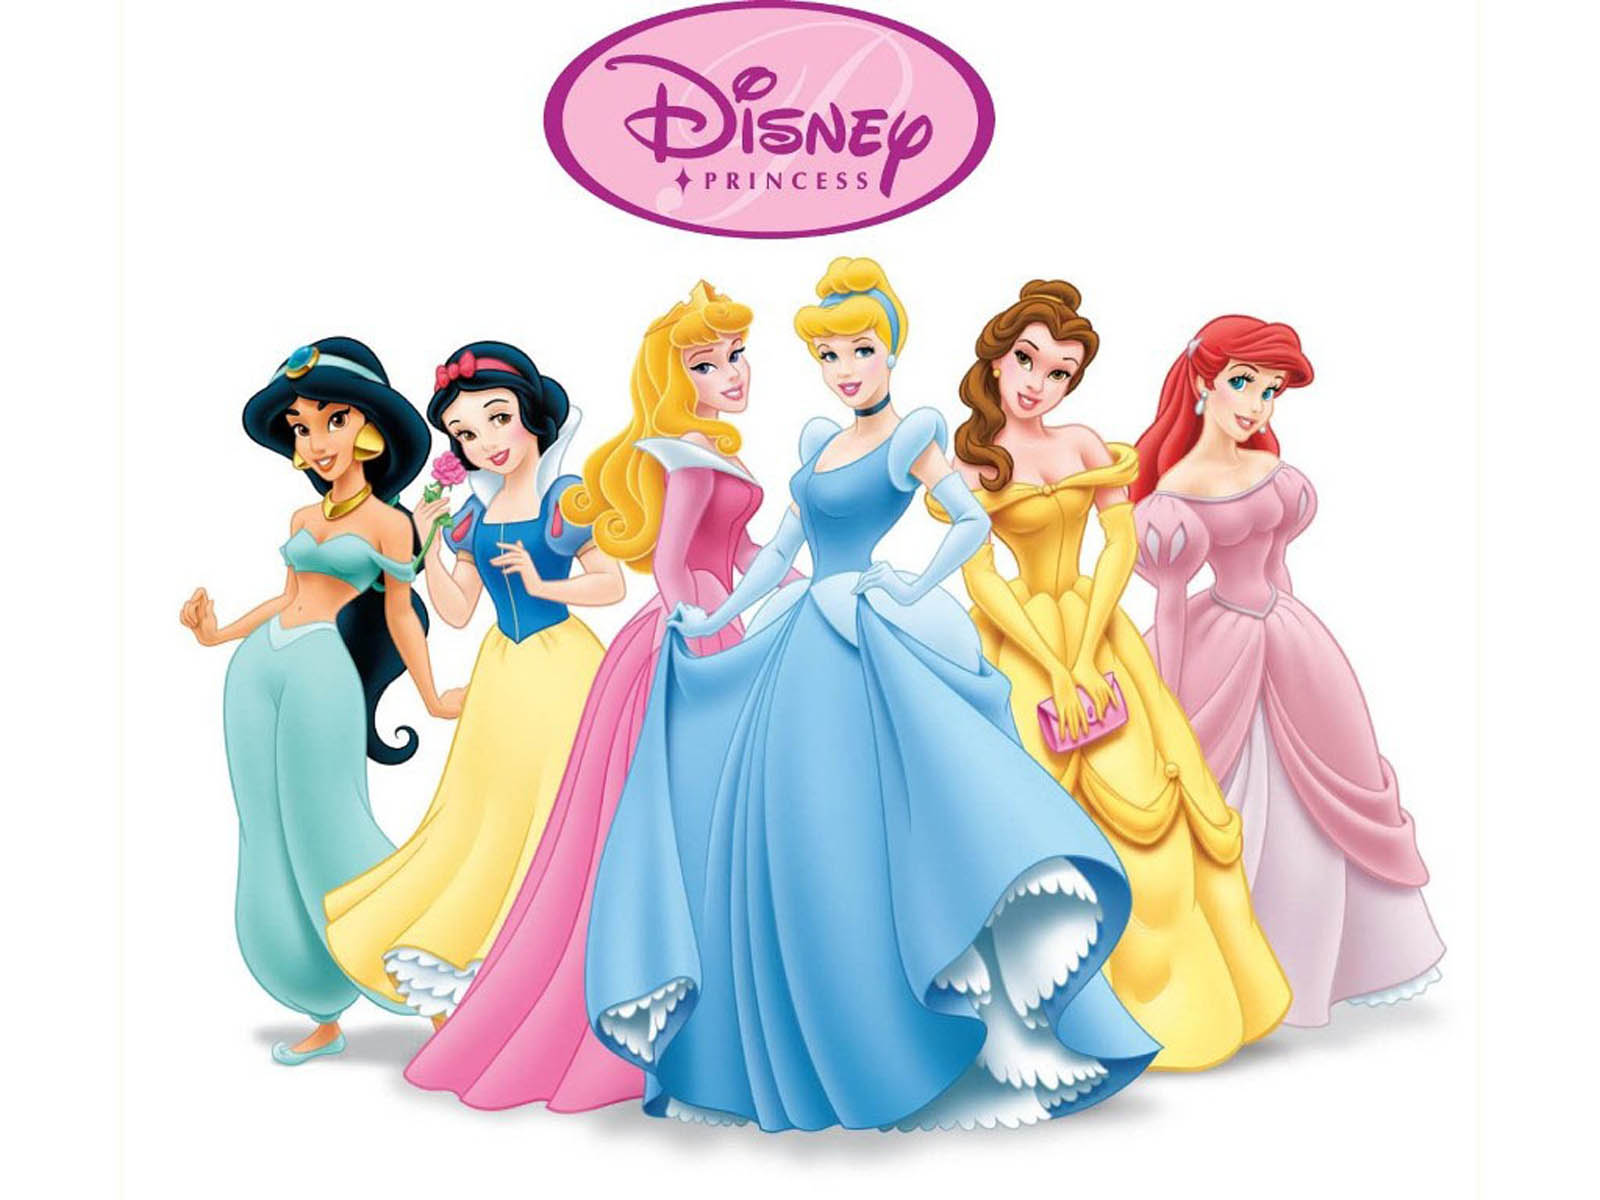 Tag Disney Princess Wallpapers Backgrounds Photos Images and